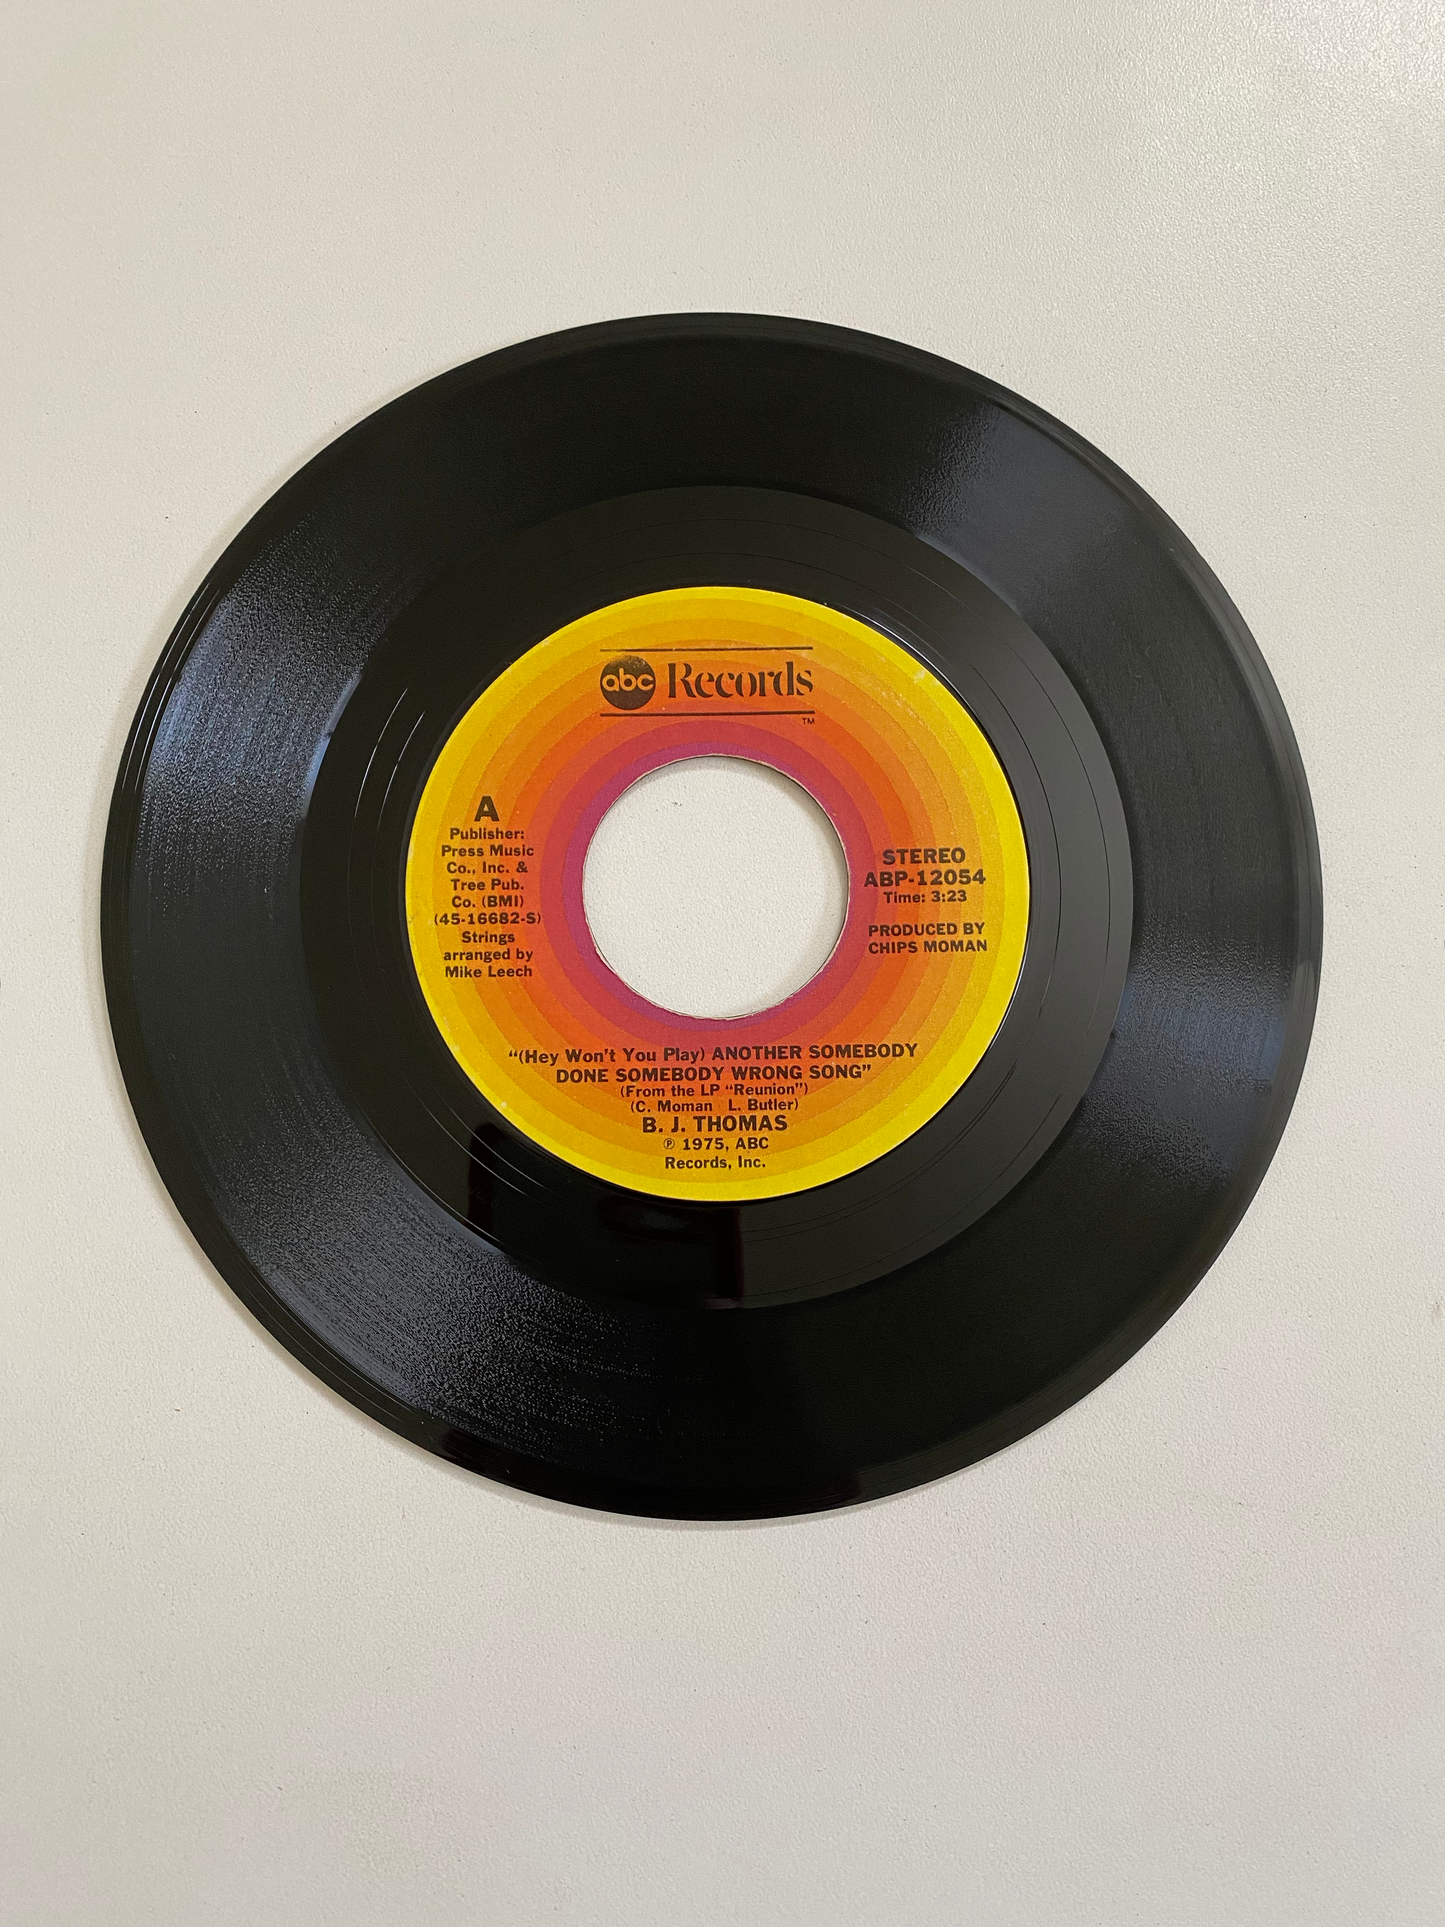 B.J. Thomas - (Hey Won't You Play) Another Somebody Done Somebody Wrong Song | 45 The Vintedge Co.